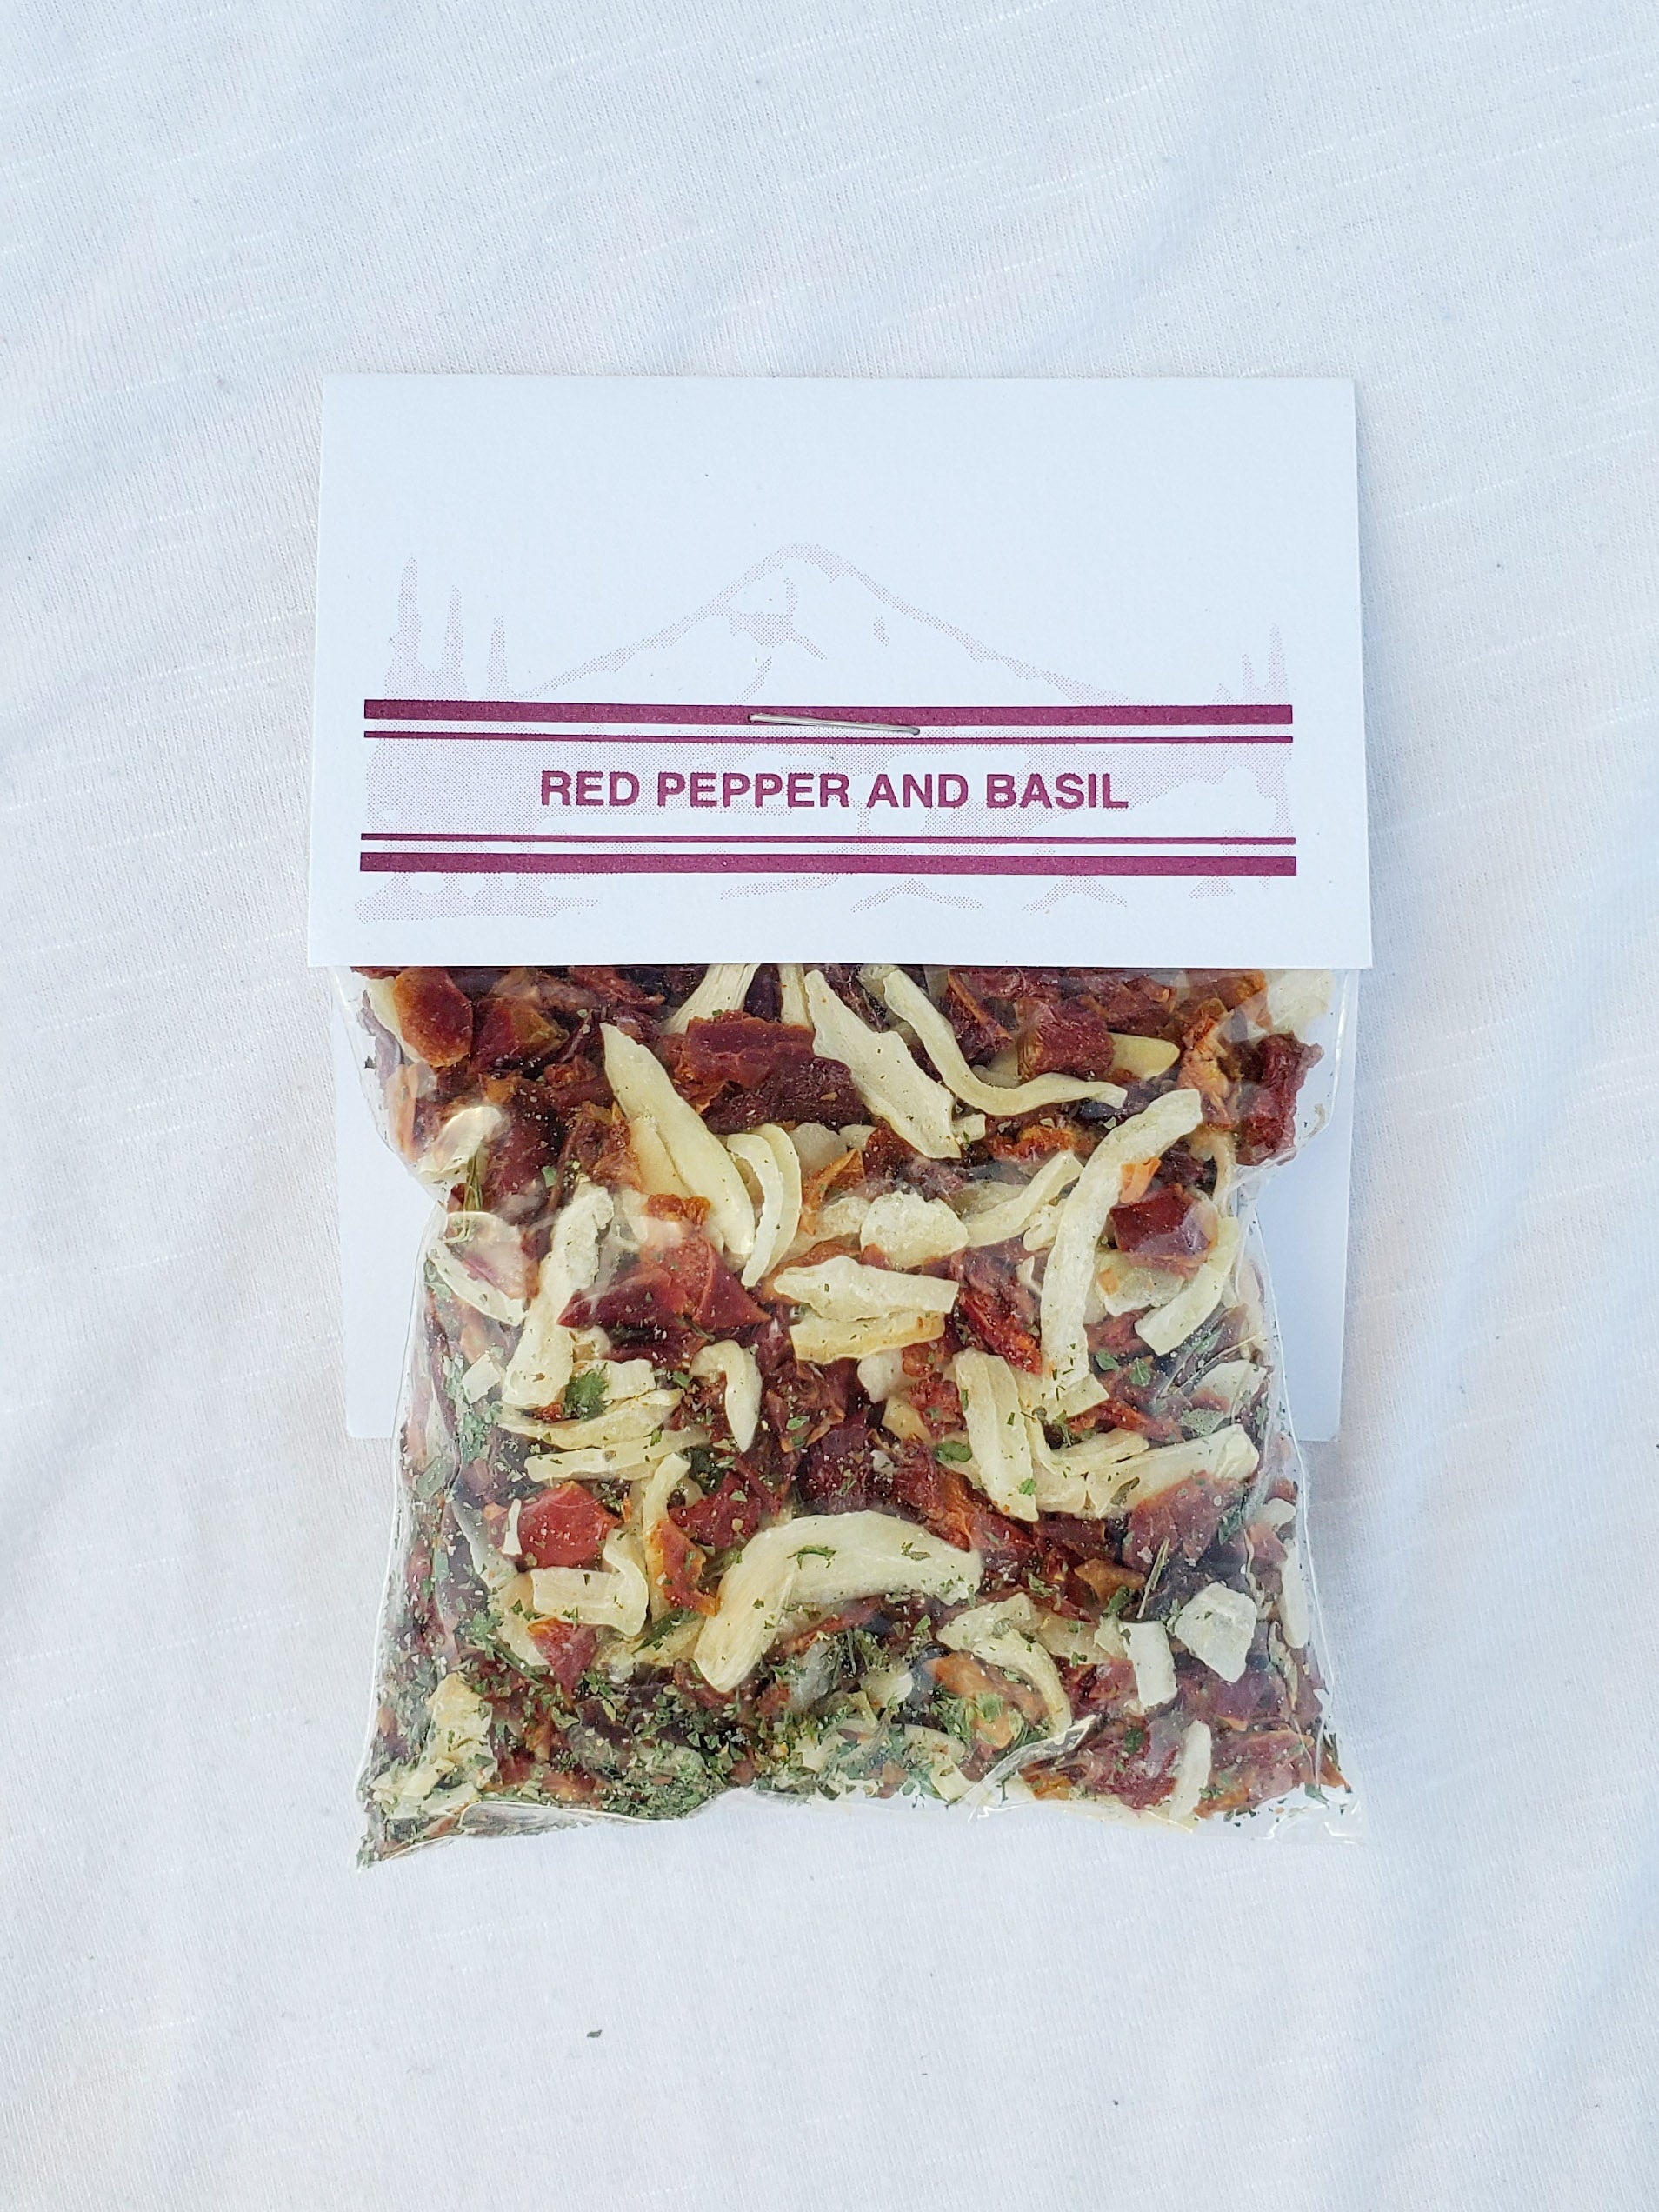 Northwest Spices - Red Pepper and Basil Seasoning